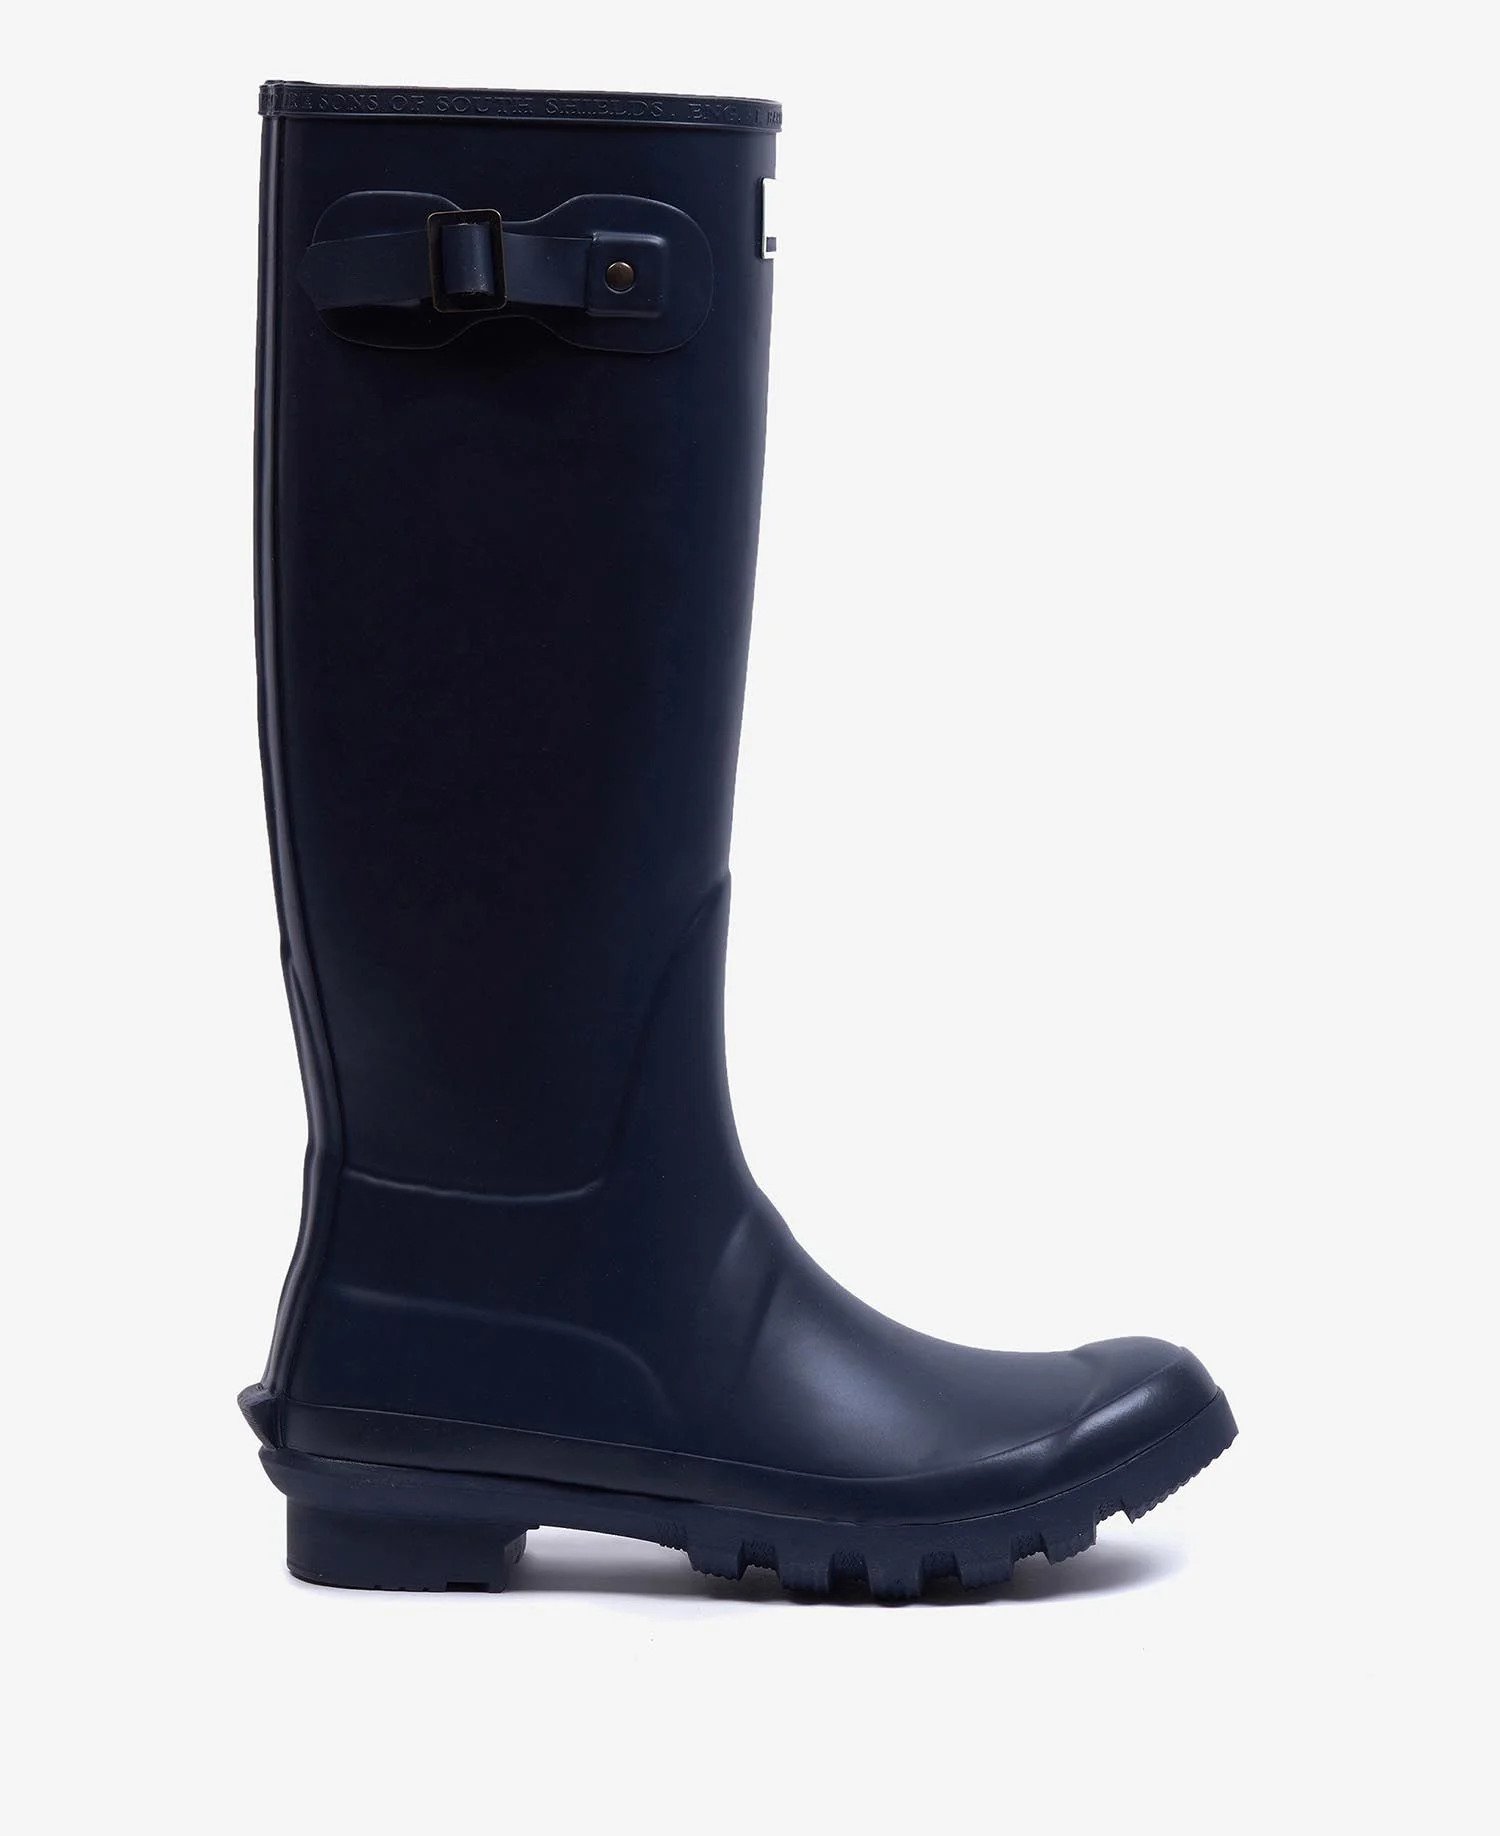 How to Clean Your Wellies This Winter | Barbour | Barbour